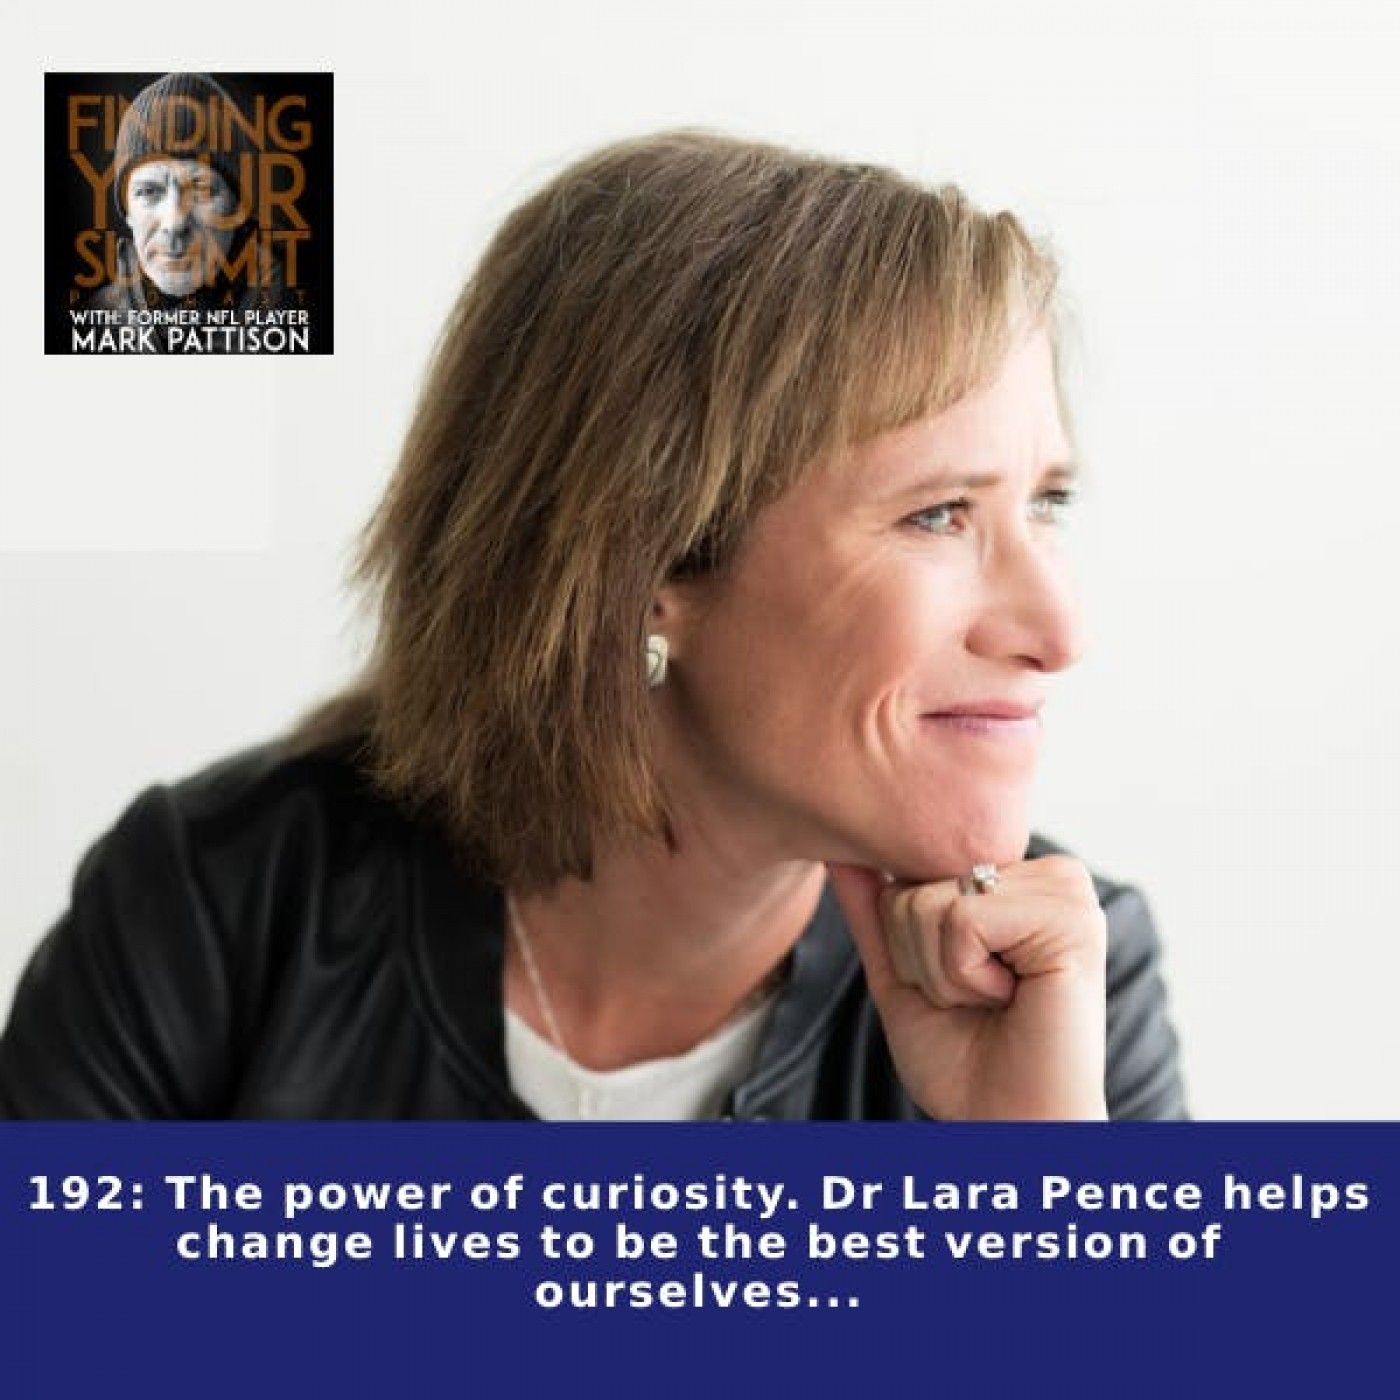 The power of curiosity. Dr Lara Pence helps change lives to be the best version of ourselves...